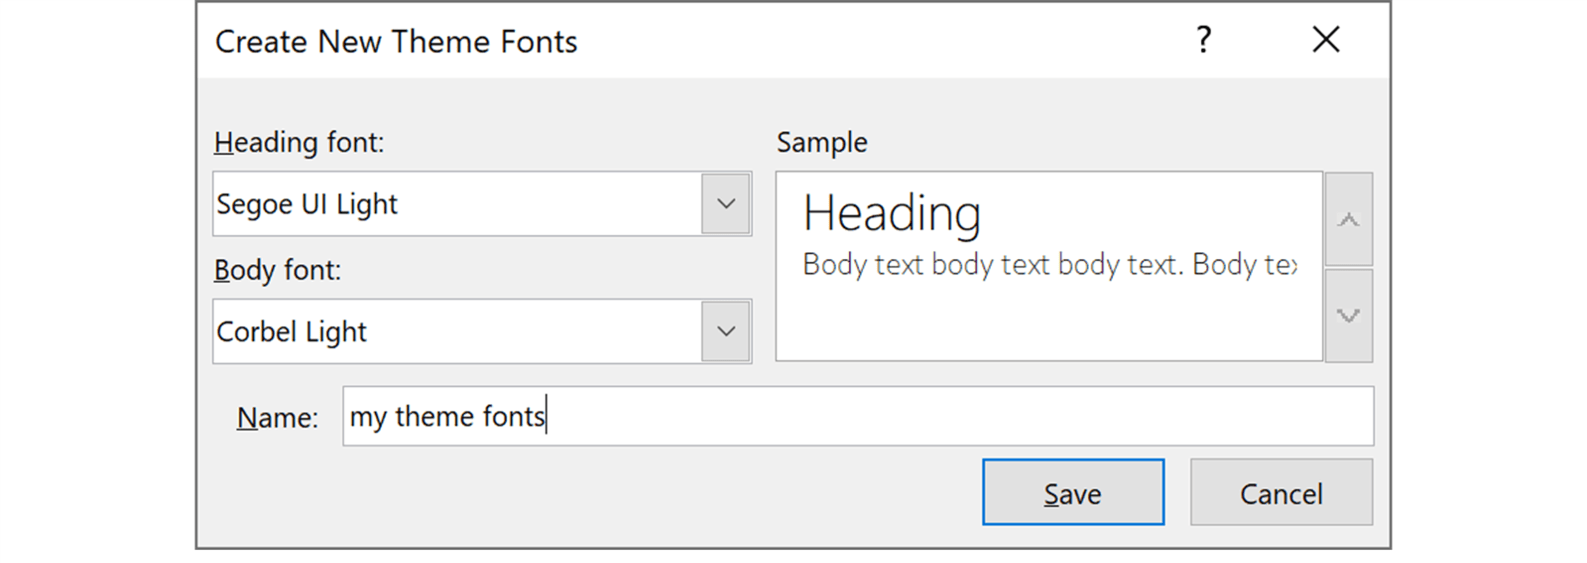 Screenshot of the Create New Theme Fonts pop up window in PowerPoint